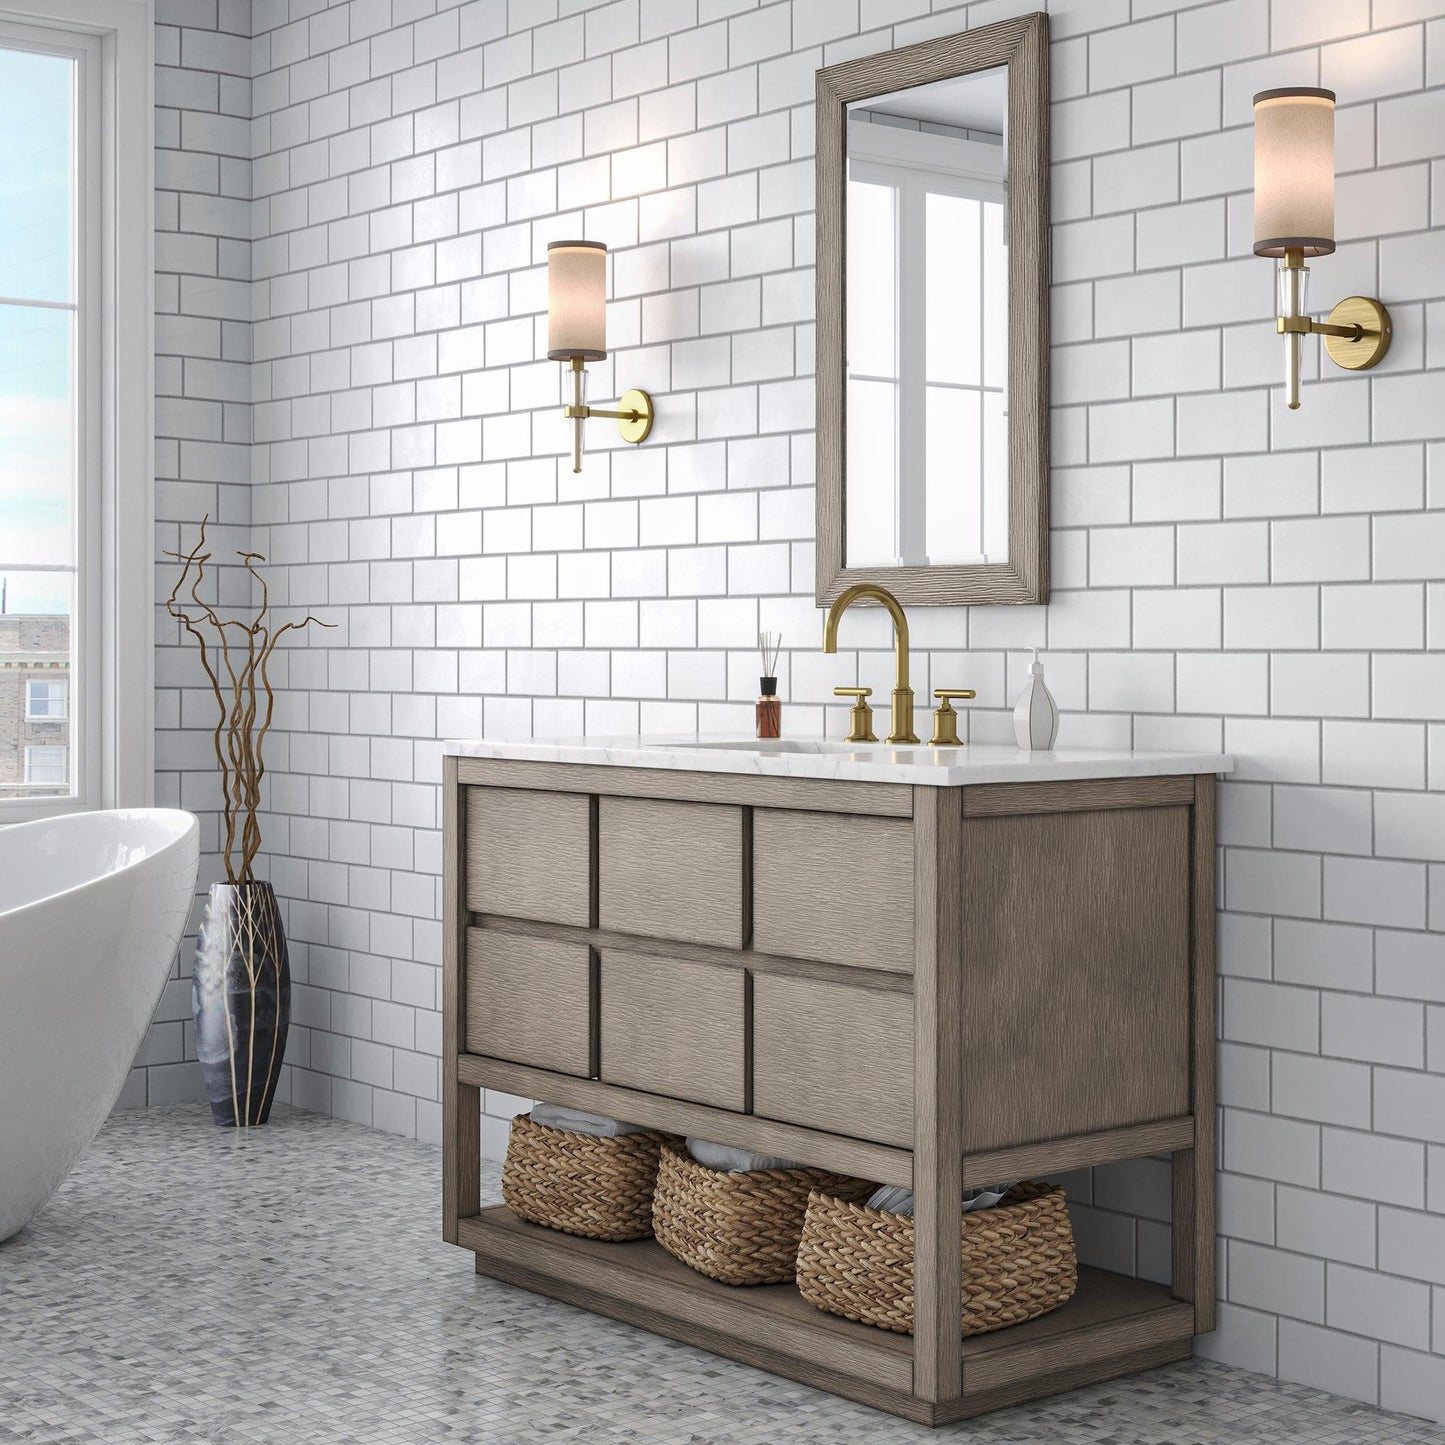 Water Creation Oakman 48" Single Sink Carrara White Marble Countertop Bath Vanity in Grey Oak with Gold Faucets and Rectangular Mirrors